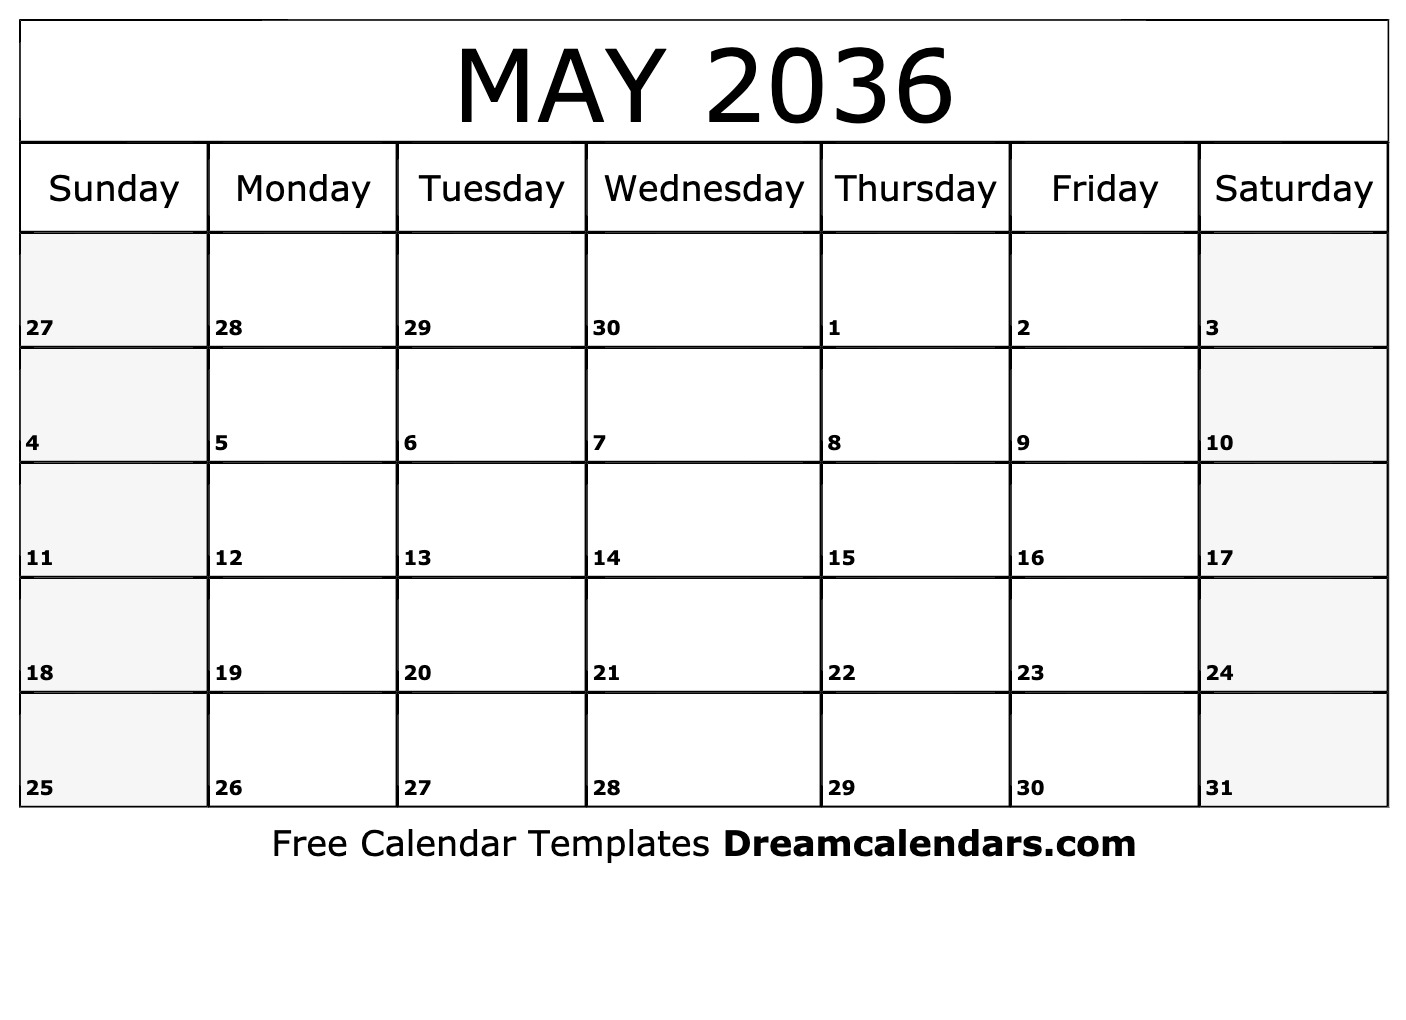 Yearly Calendar Template 2036